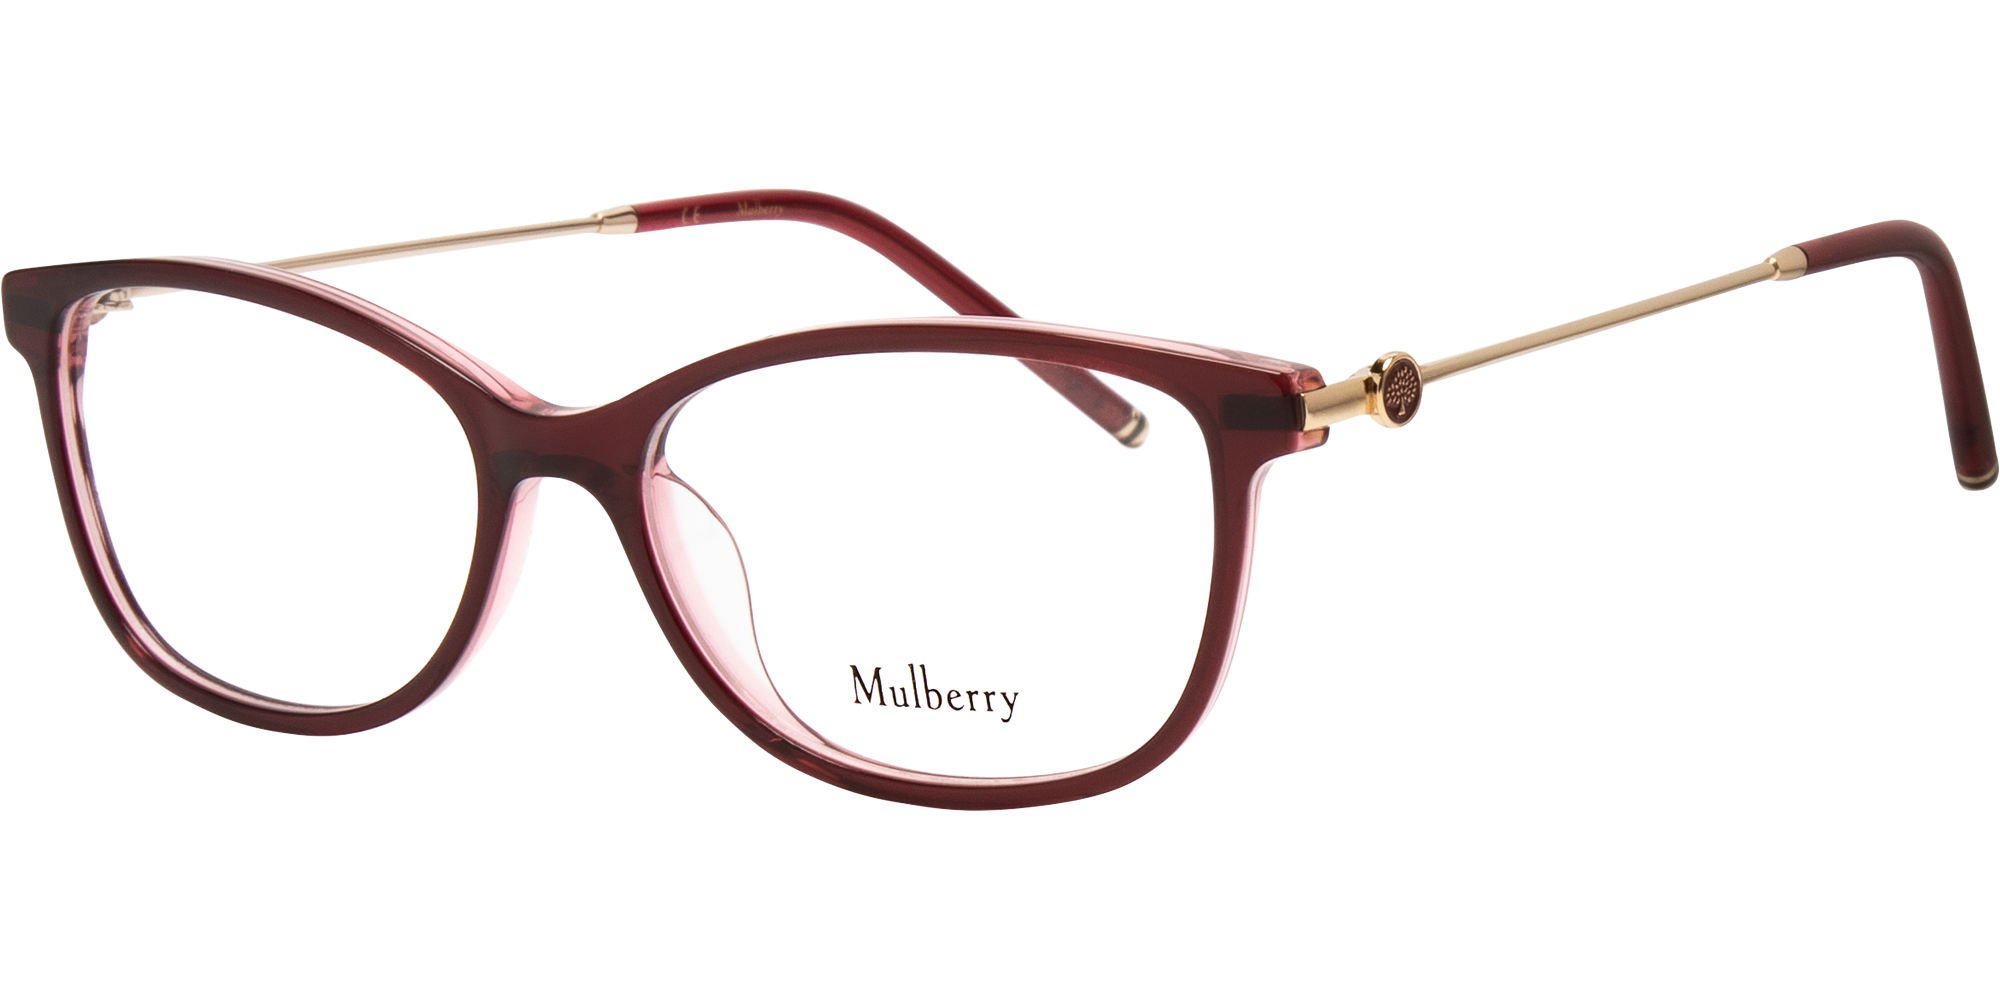 Mulberry VML105 image number null